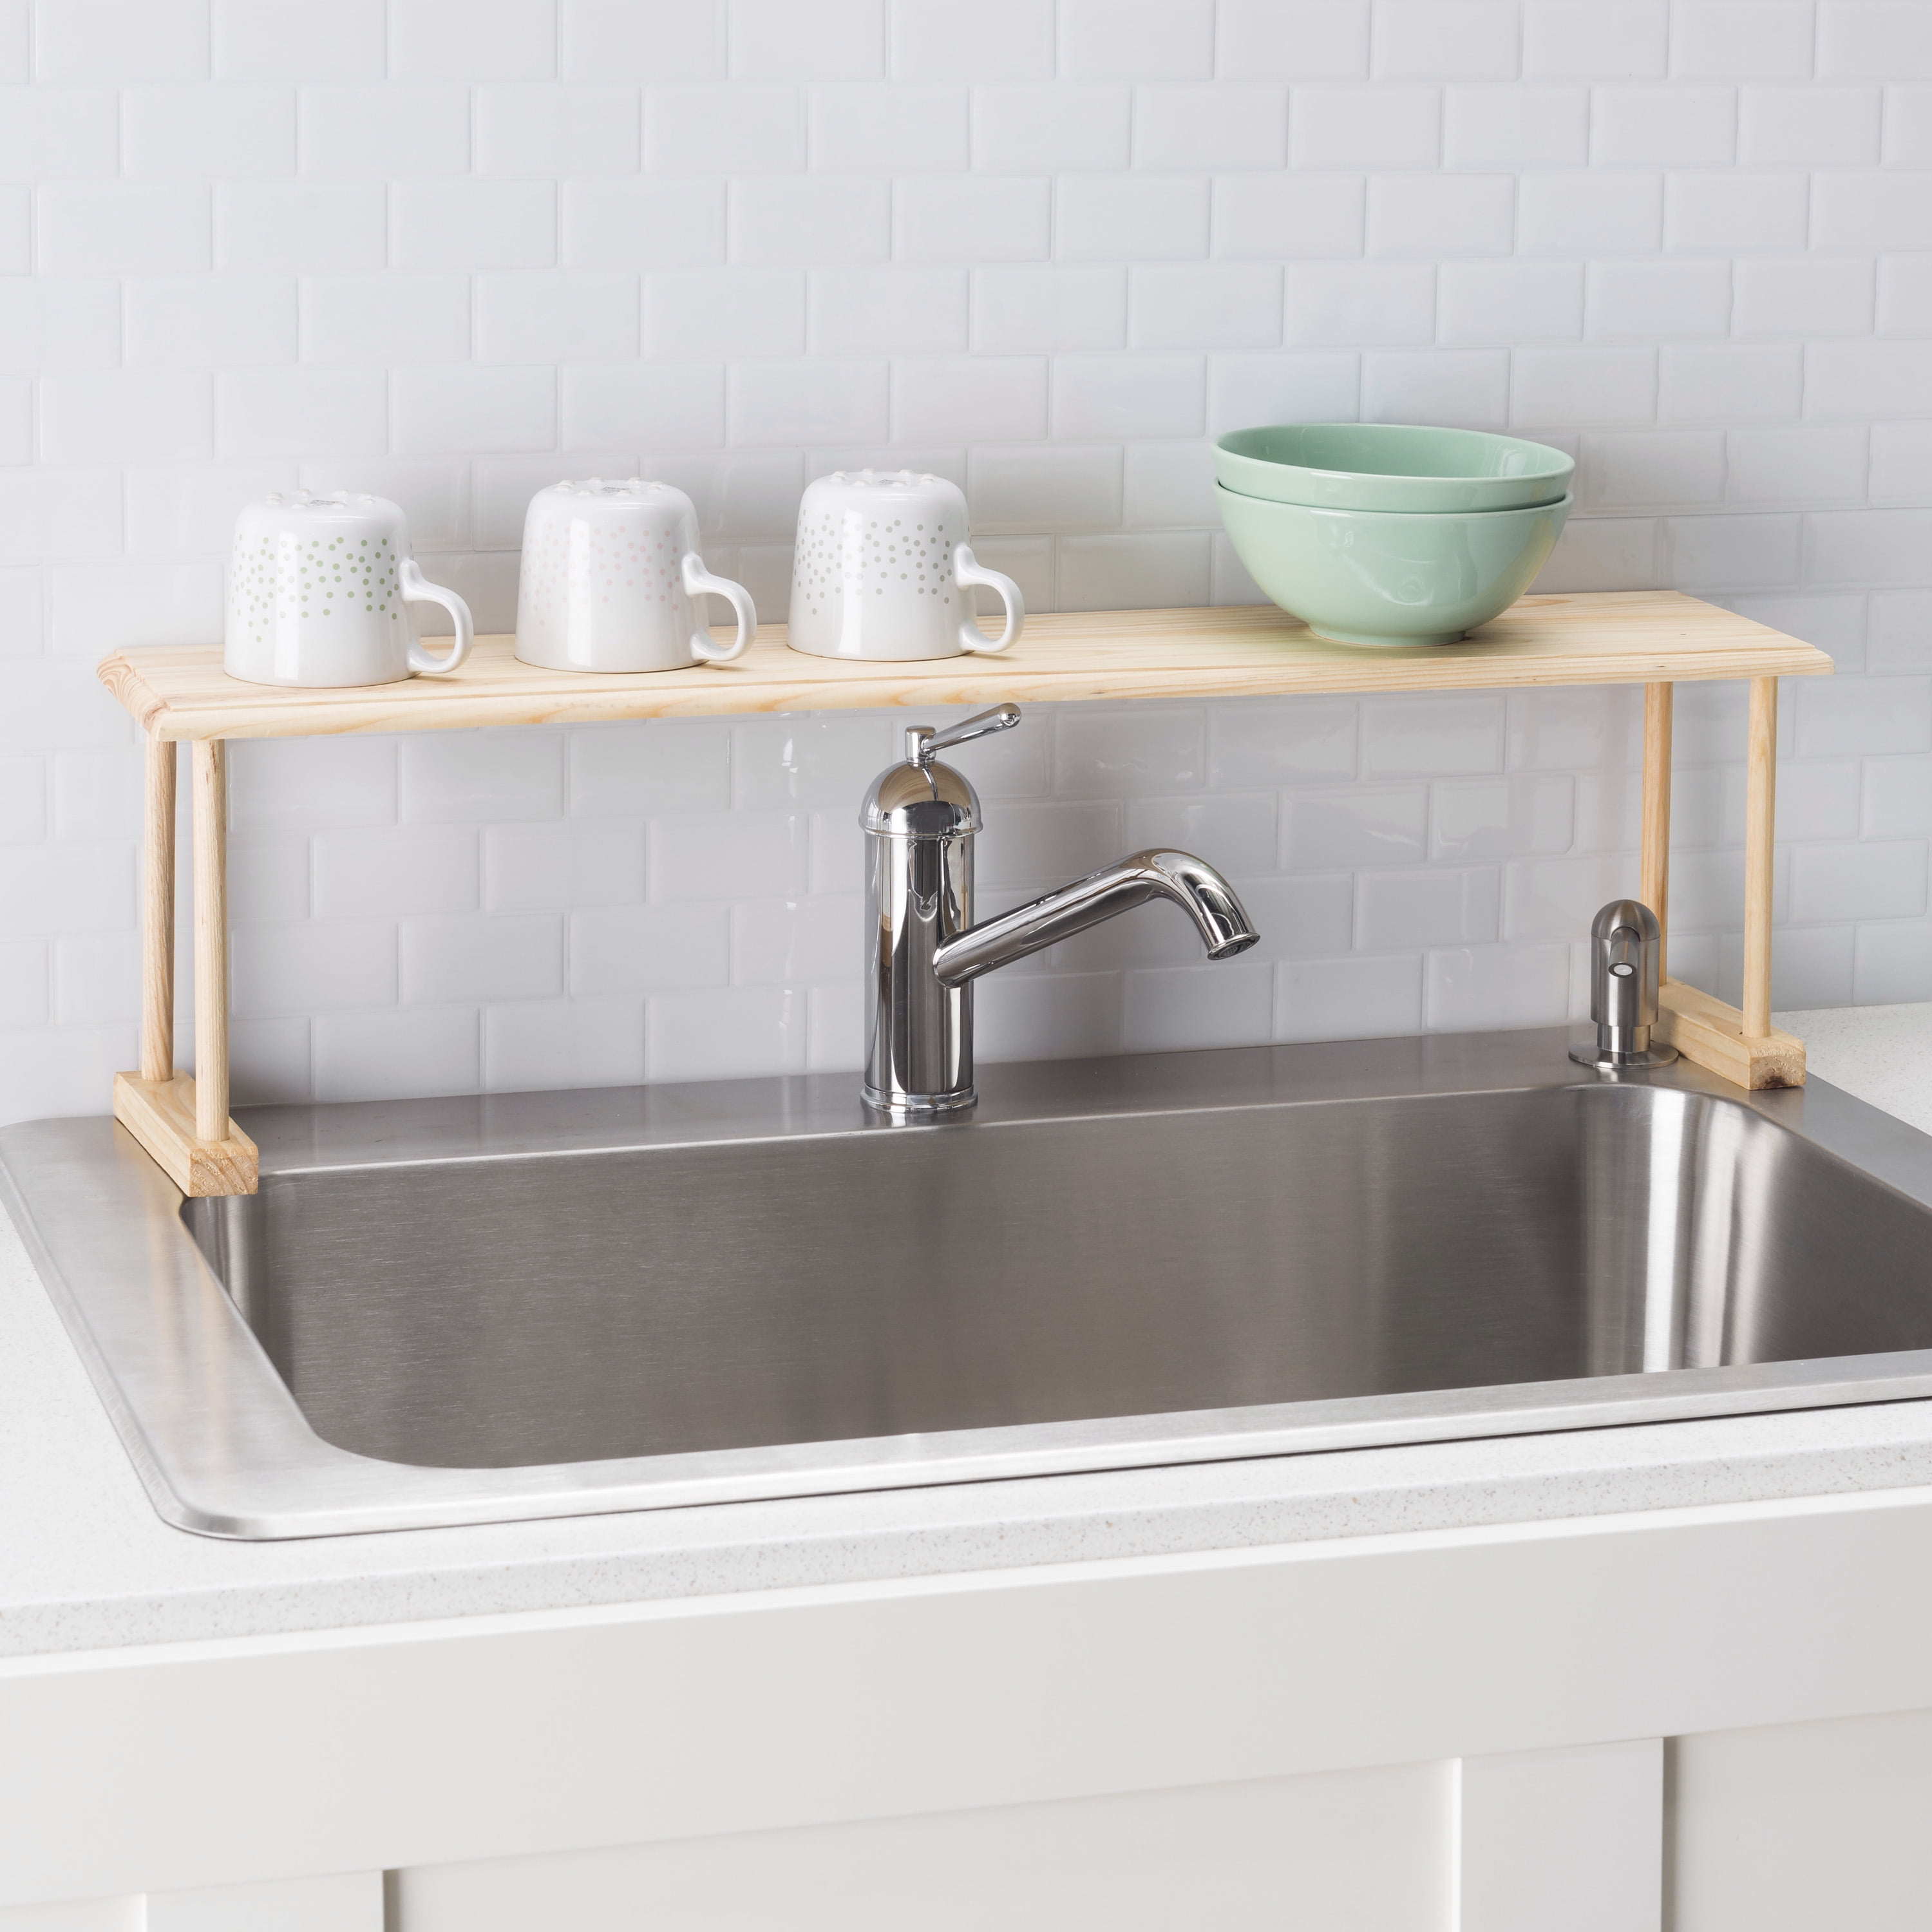 This Must-Have Under-the-Sink Storage Shelf Is 38% Off